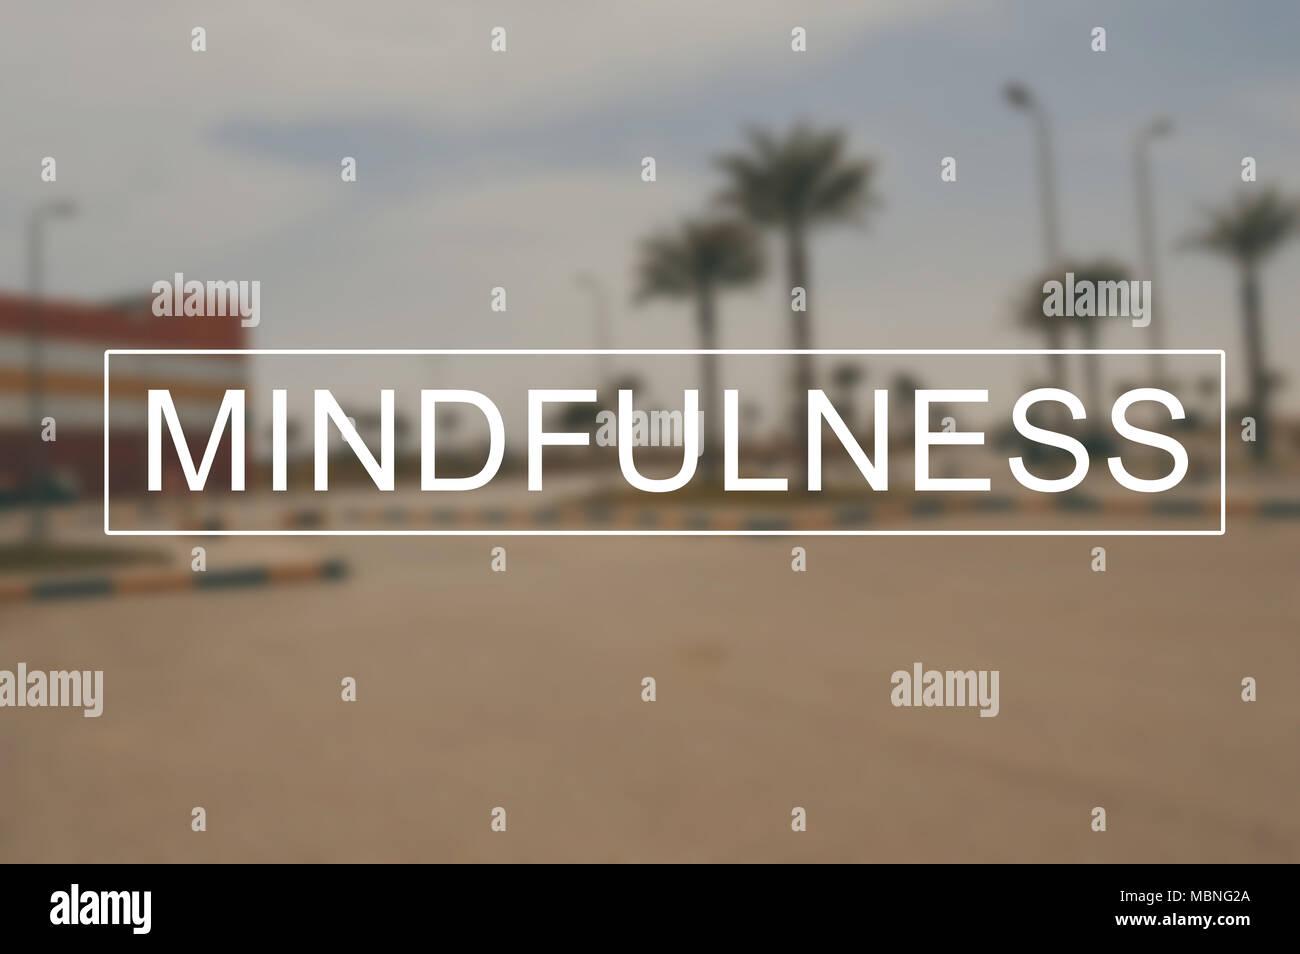 mindfulness with blurring background Stock Photo